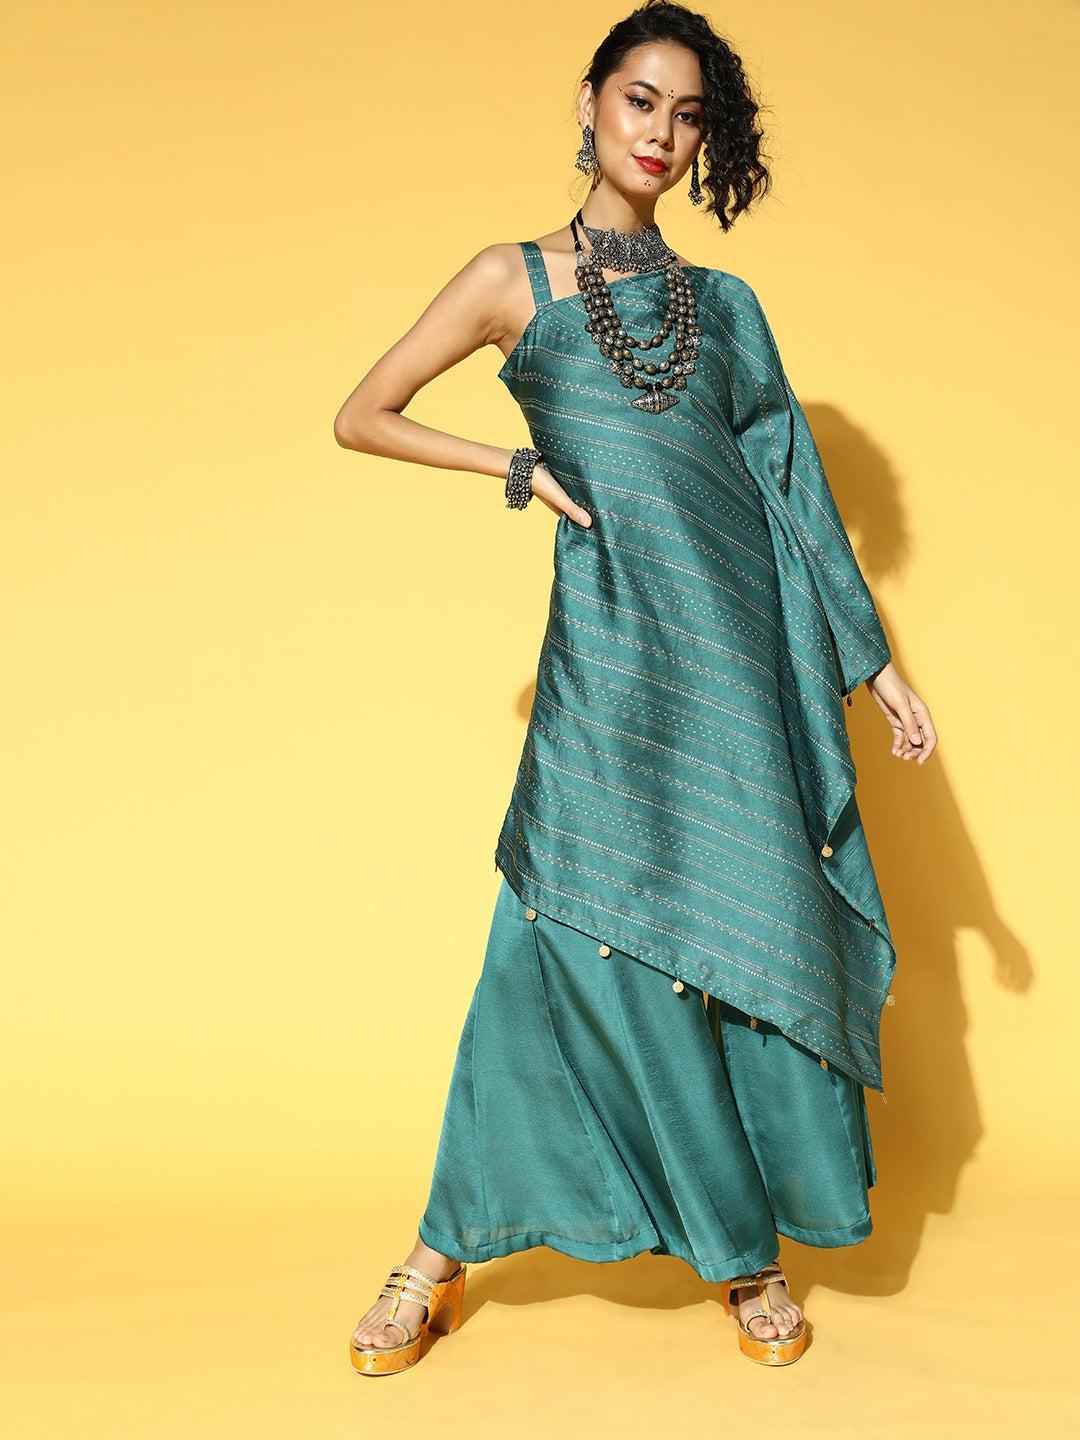 teal-green-golden-striped-co-ords-10140182GR, Women Indian Ethnic Clothing, Silk Blend Co-Ords